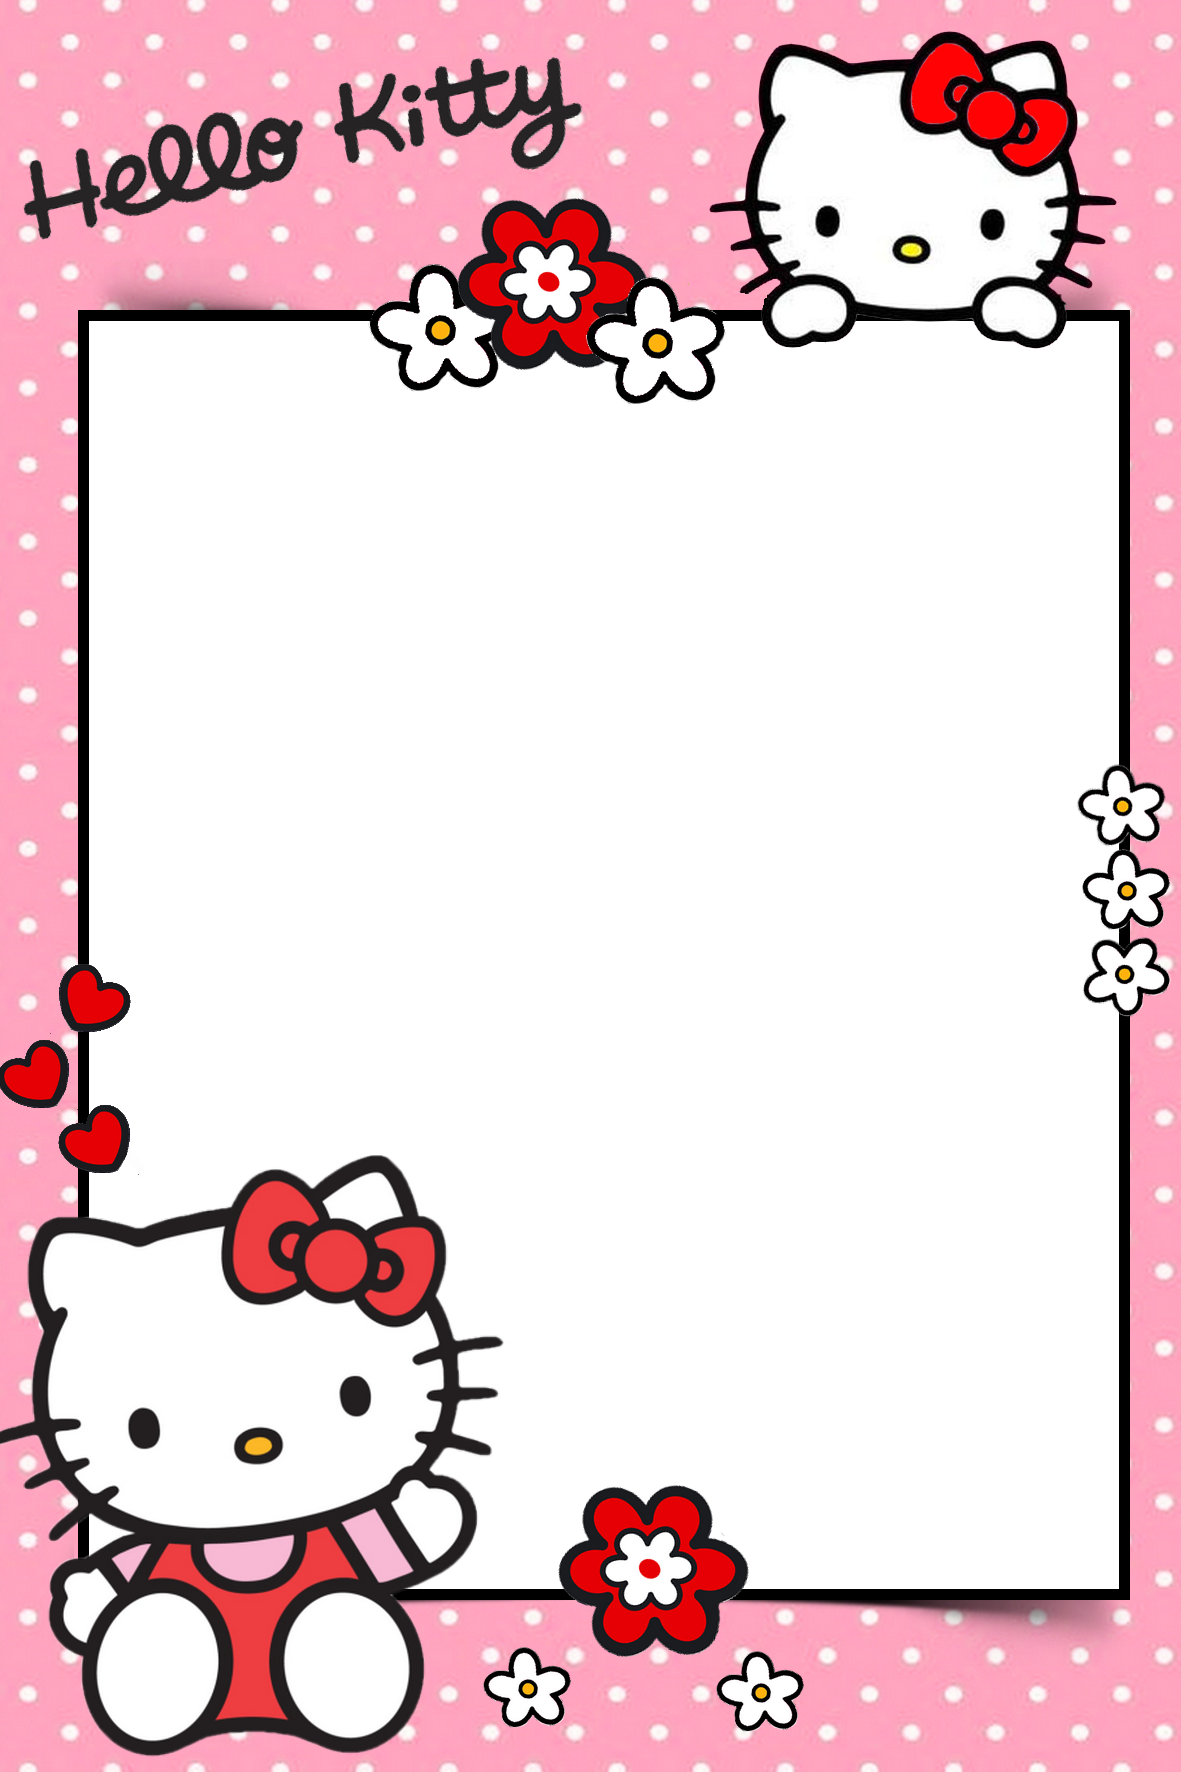 Hello Kitty Frame PNG Image